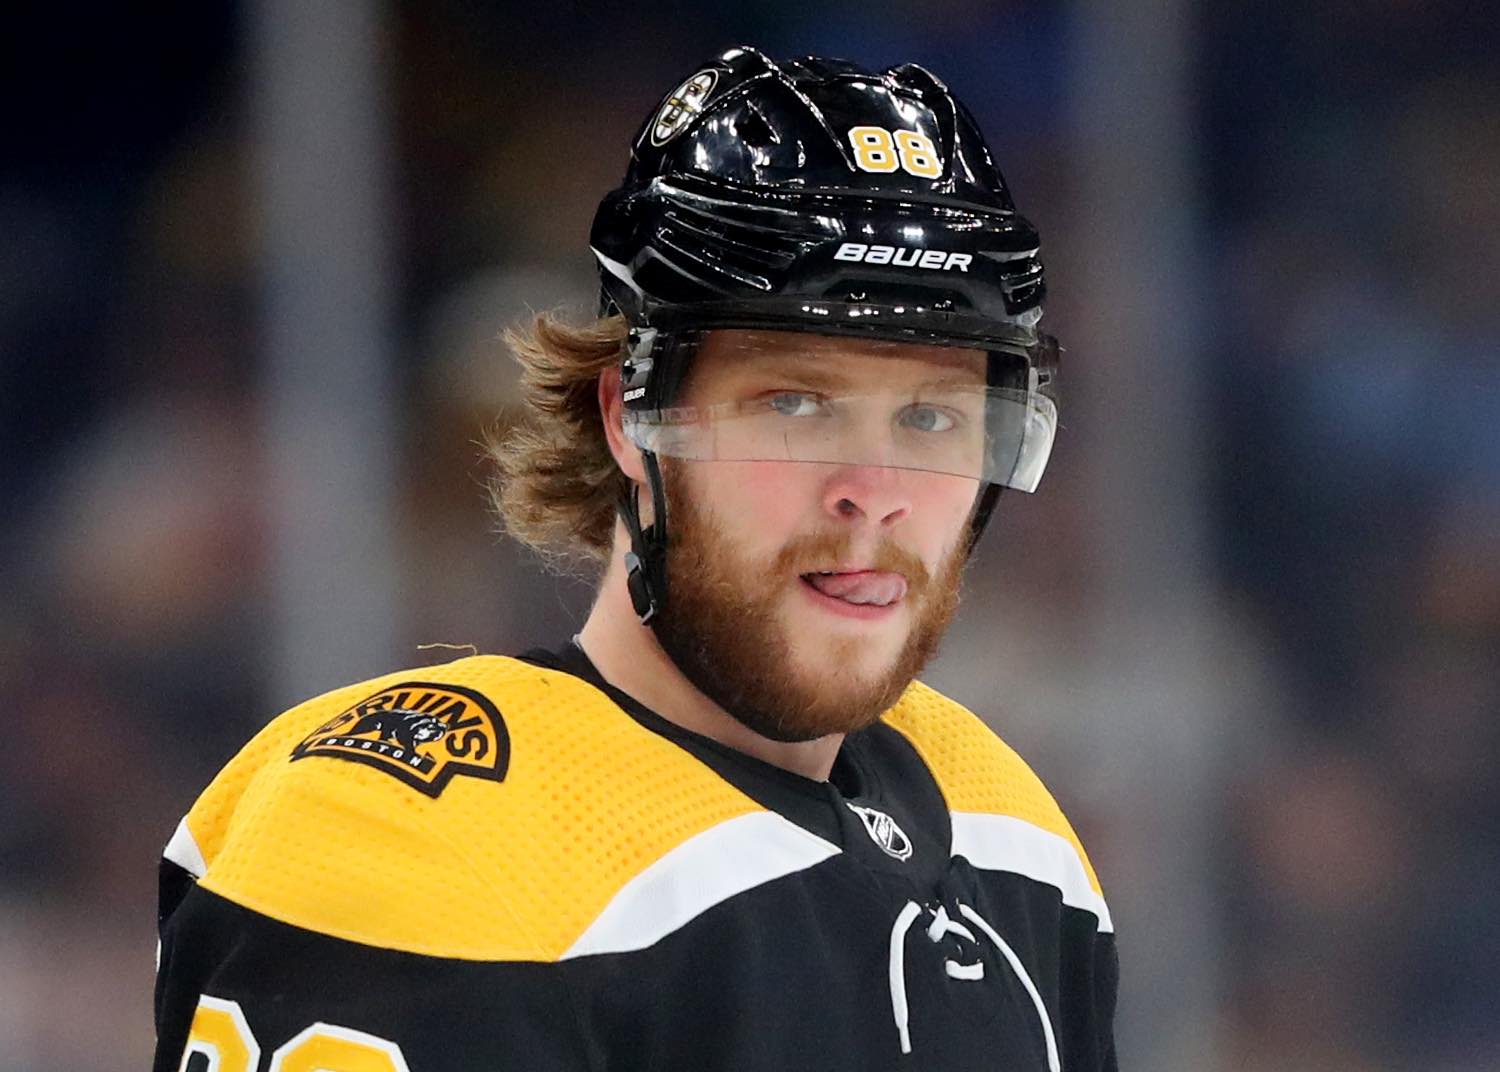 BOSTON, MASSACHUSETTS - FEBRUARY 25: David Pastrnak #88 of the Boston Bruins looks on during the first period of the game against the Calgary Flames at TD Garden on February 25, 2020 in Boston, Massachusetts. (Photo by Maddie Meyer/Getty Images)